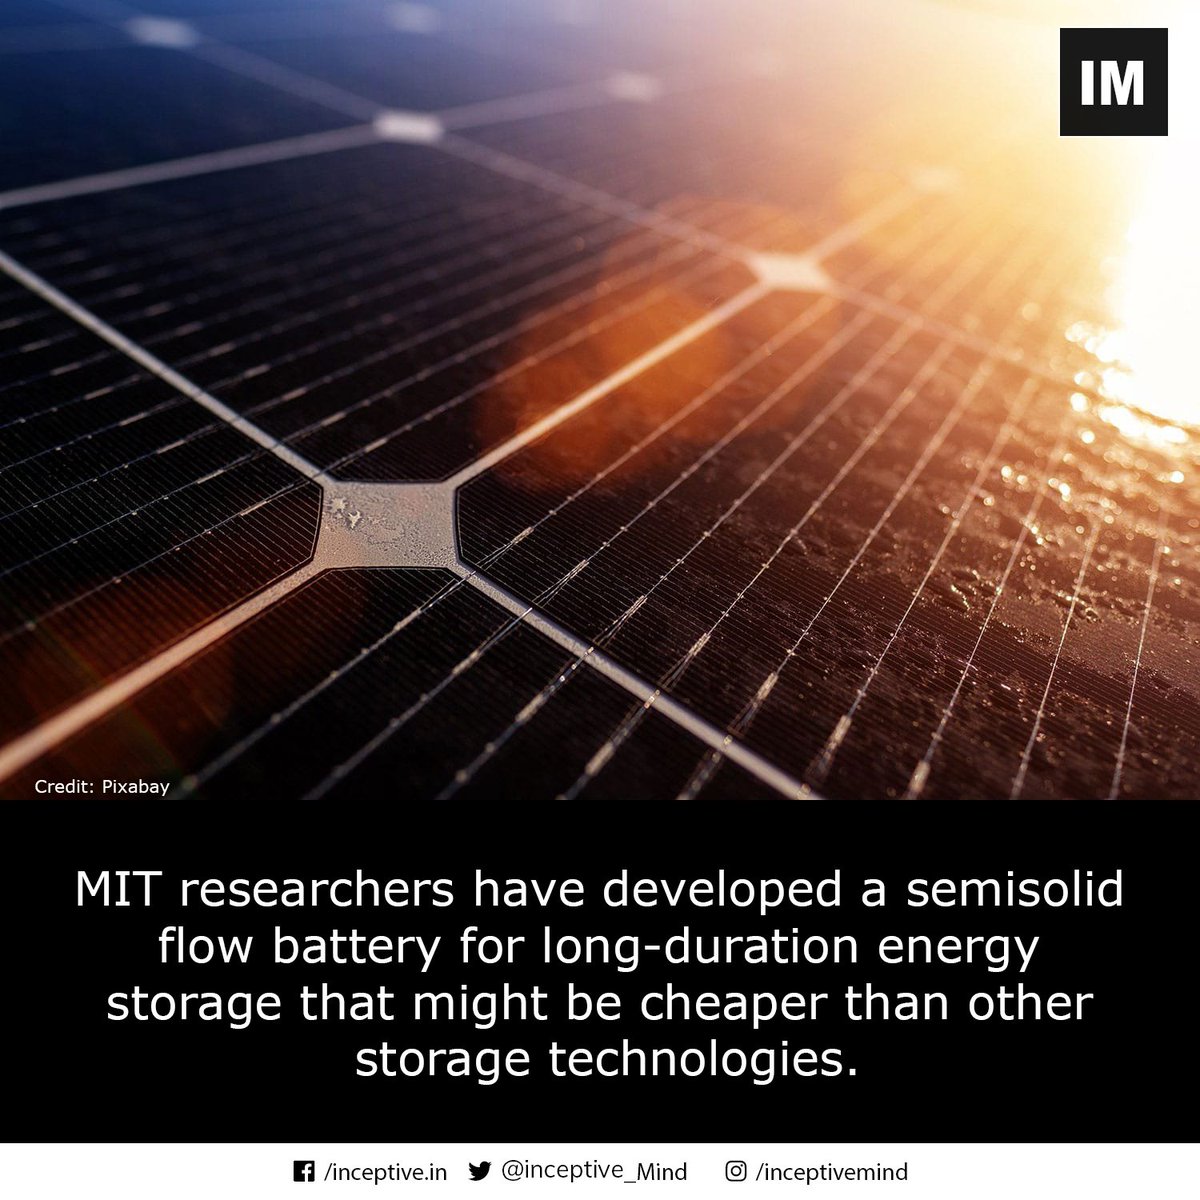 New cost-efficient semisolid flow battery for wind, solar energy storage.
#solarenergystorage #flowbattery #research #storagetechnology #innovation #newinvention #newtechnology #inceptivemind